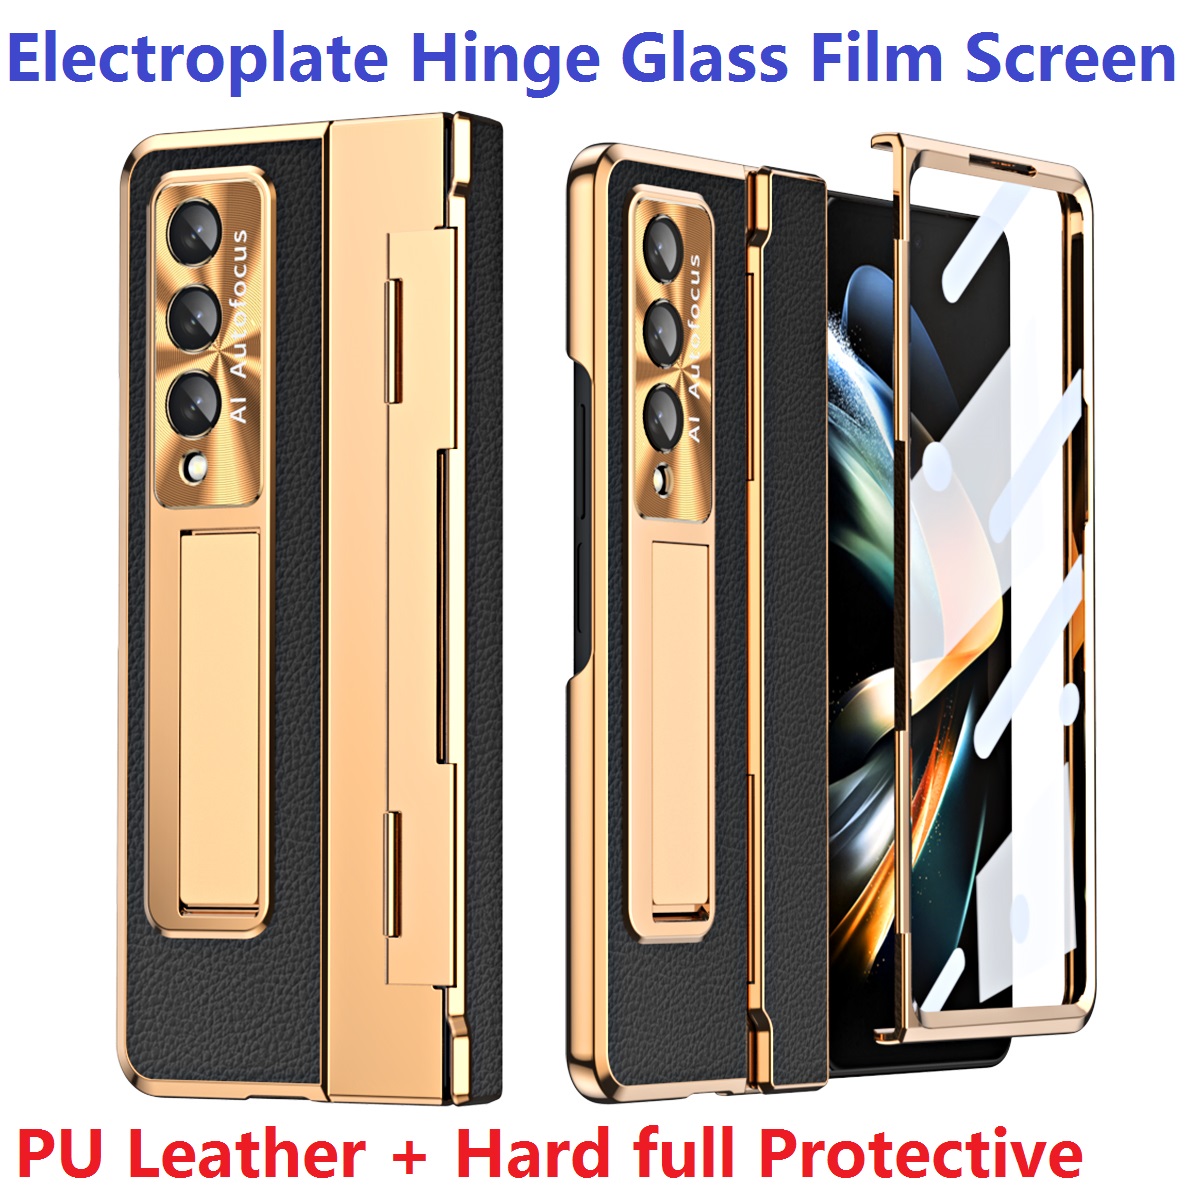 

Plating Hard Cases For Samsung Galaxy Z Fold 4 Fold 3 5G Case Glass Film Screen Hinge Protection Cover, Light blue